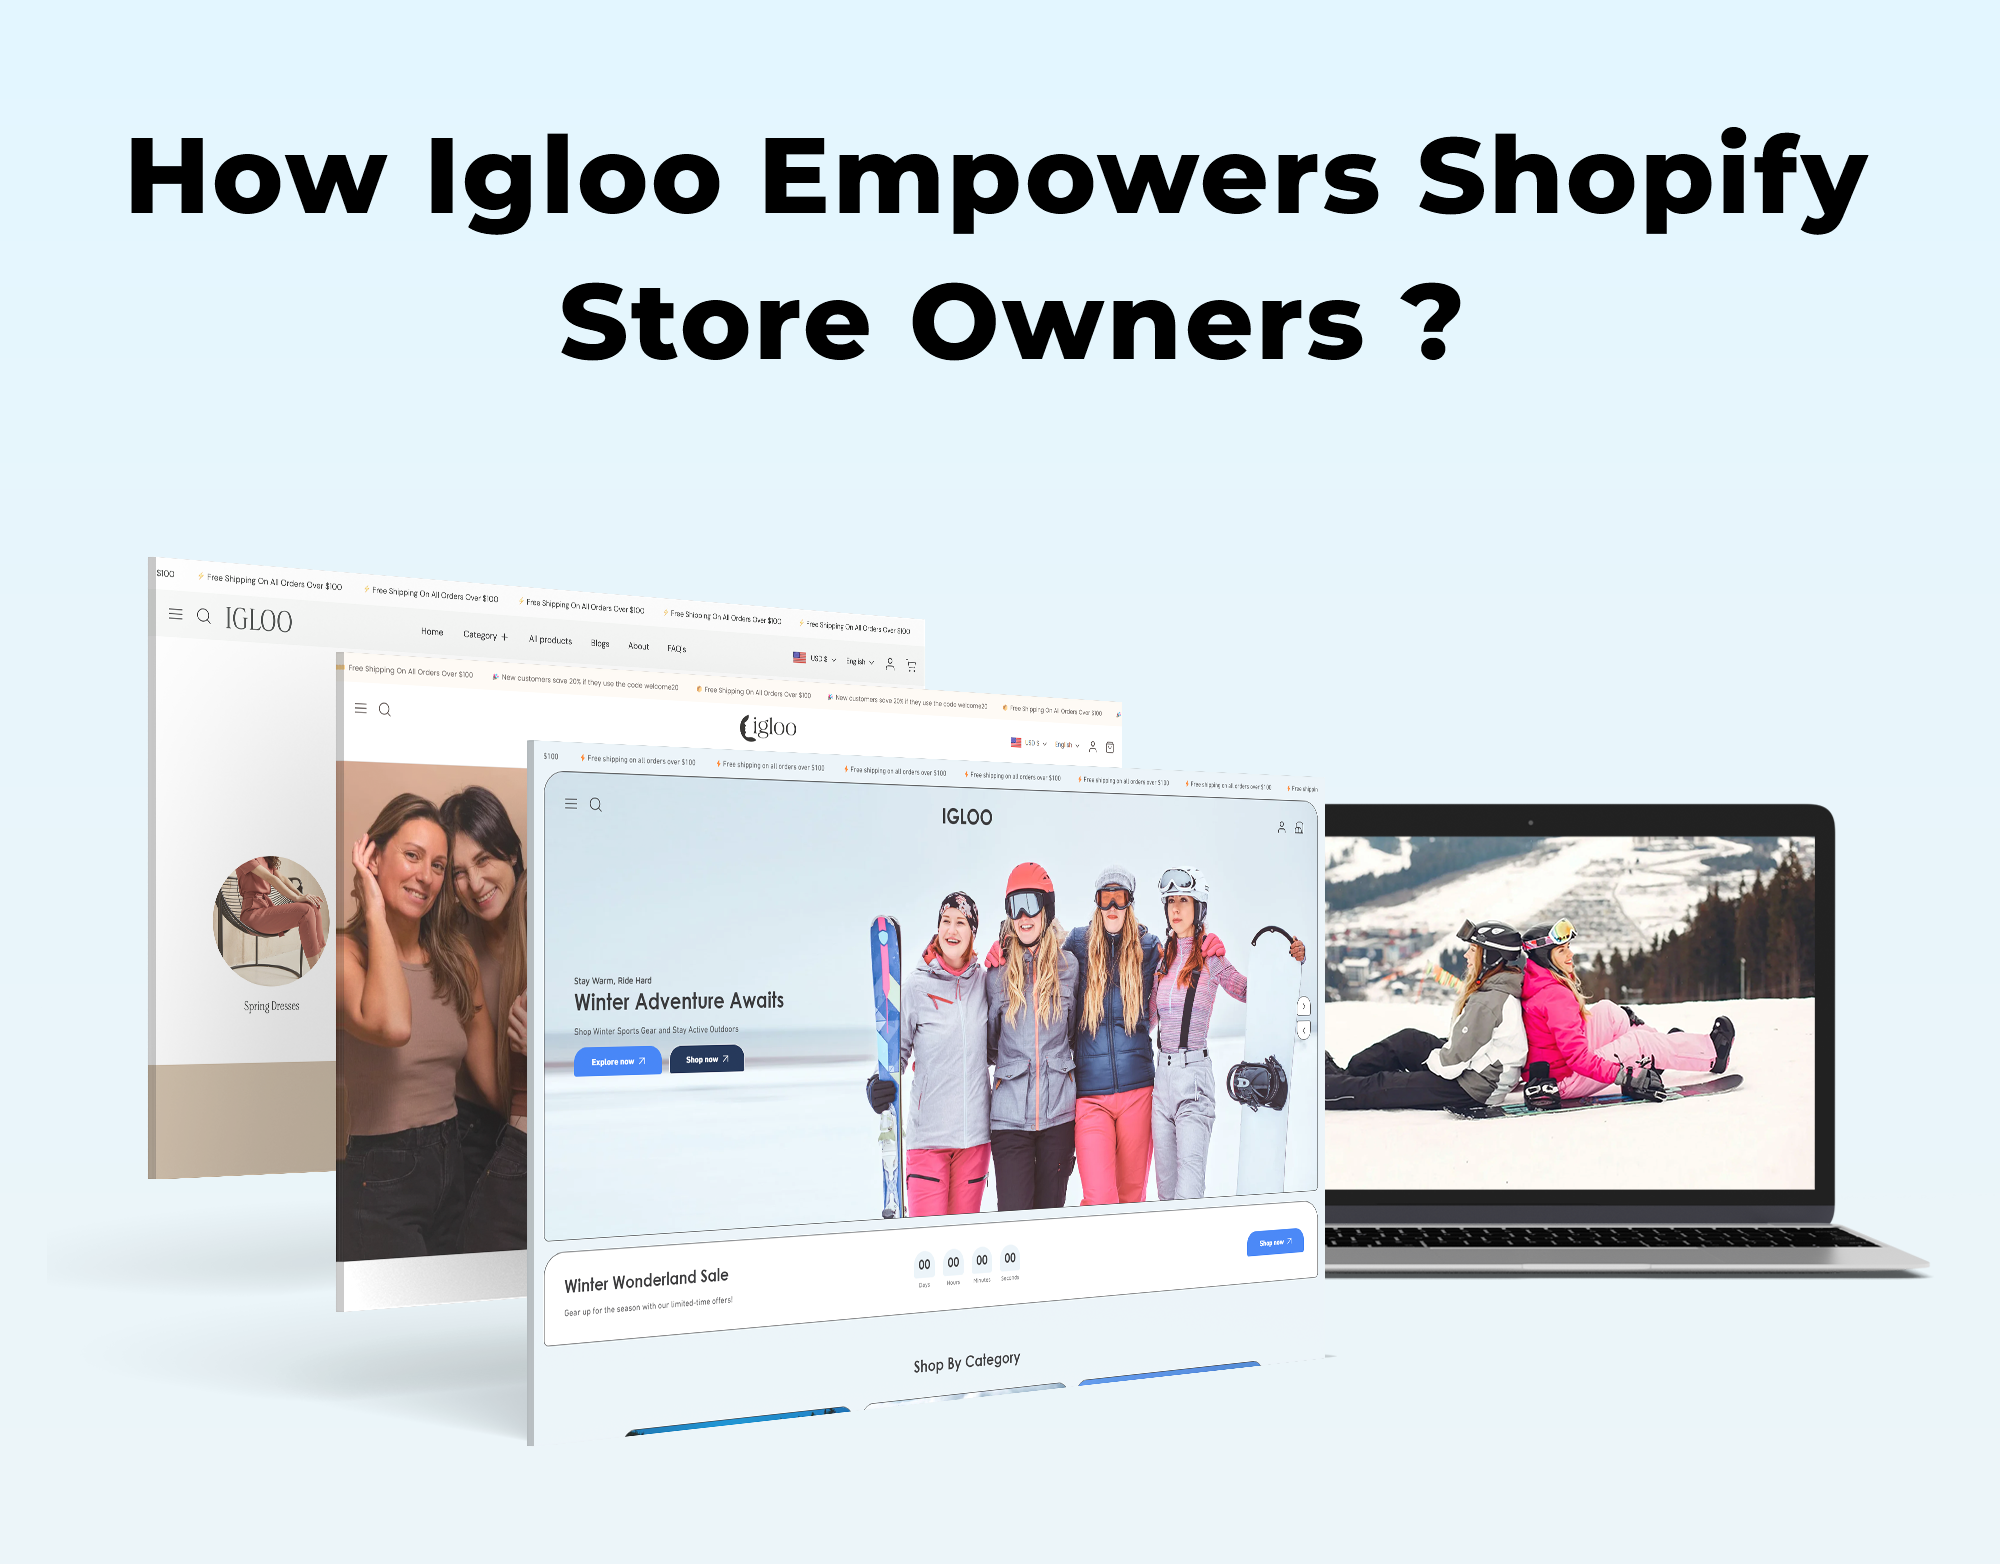 How Igloo Empowers Shopify Store Owners